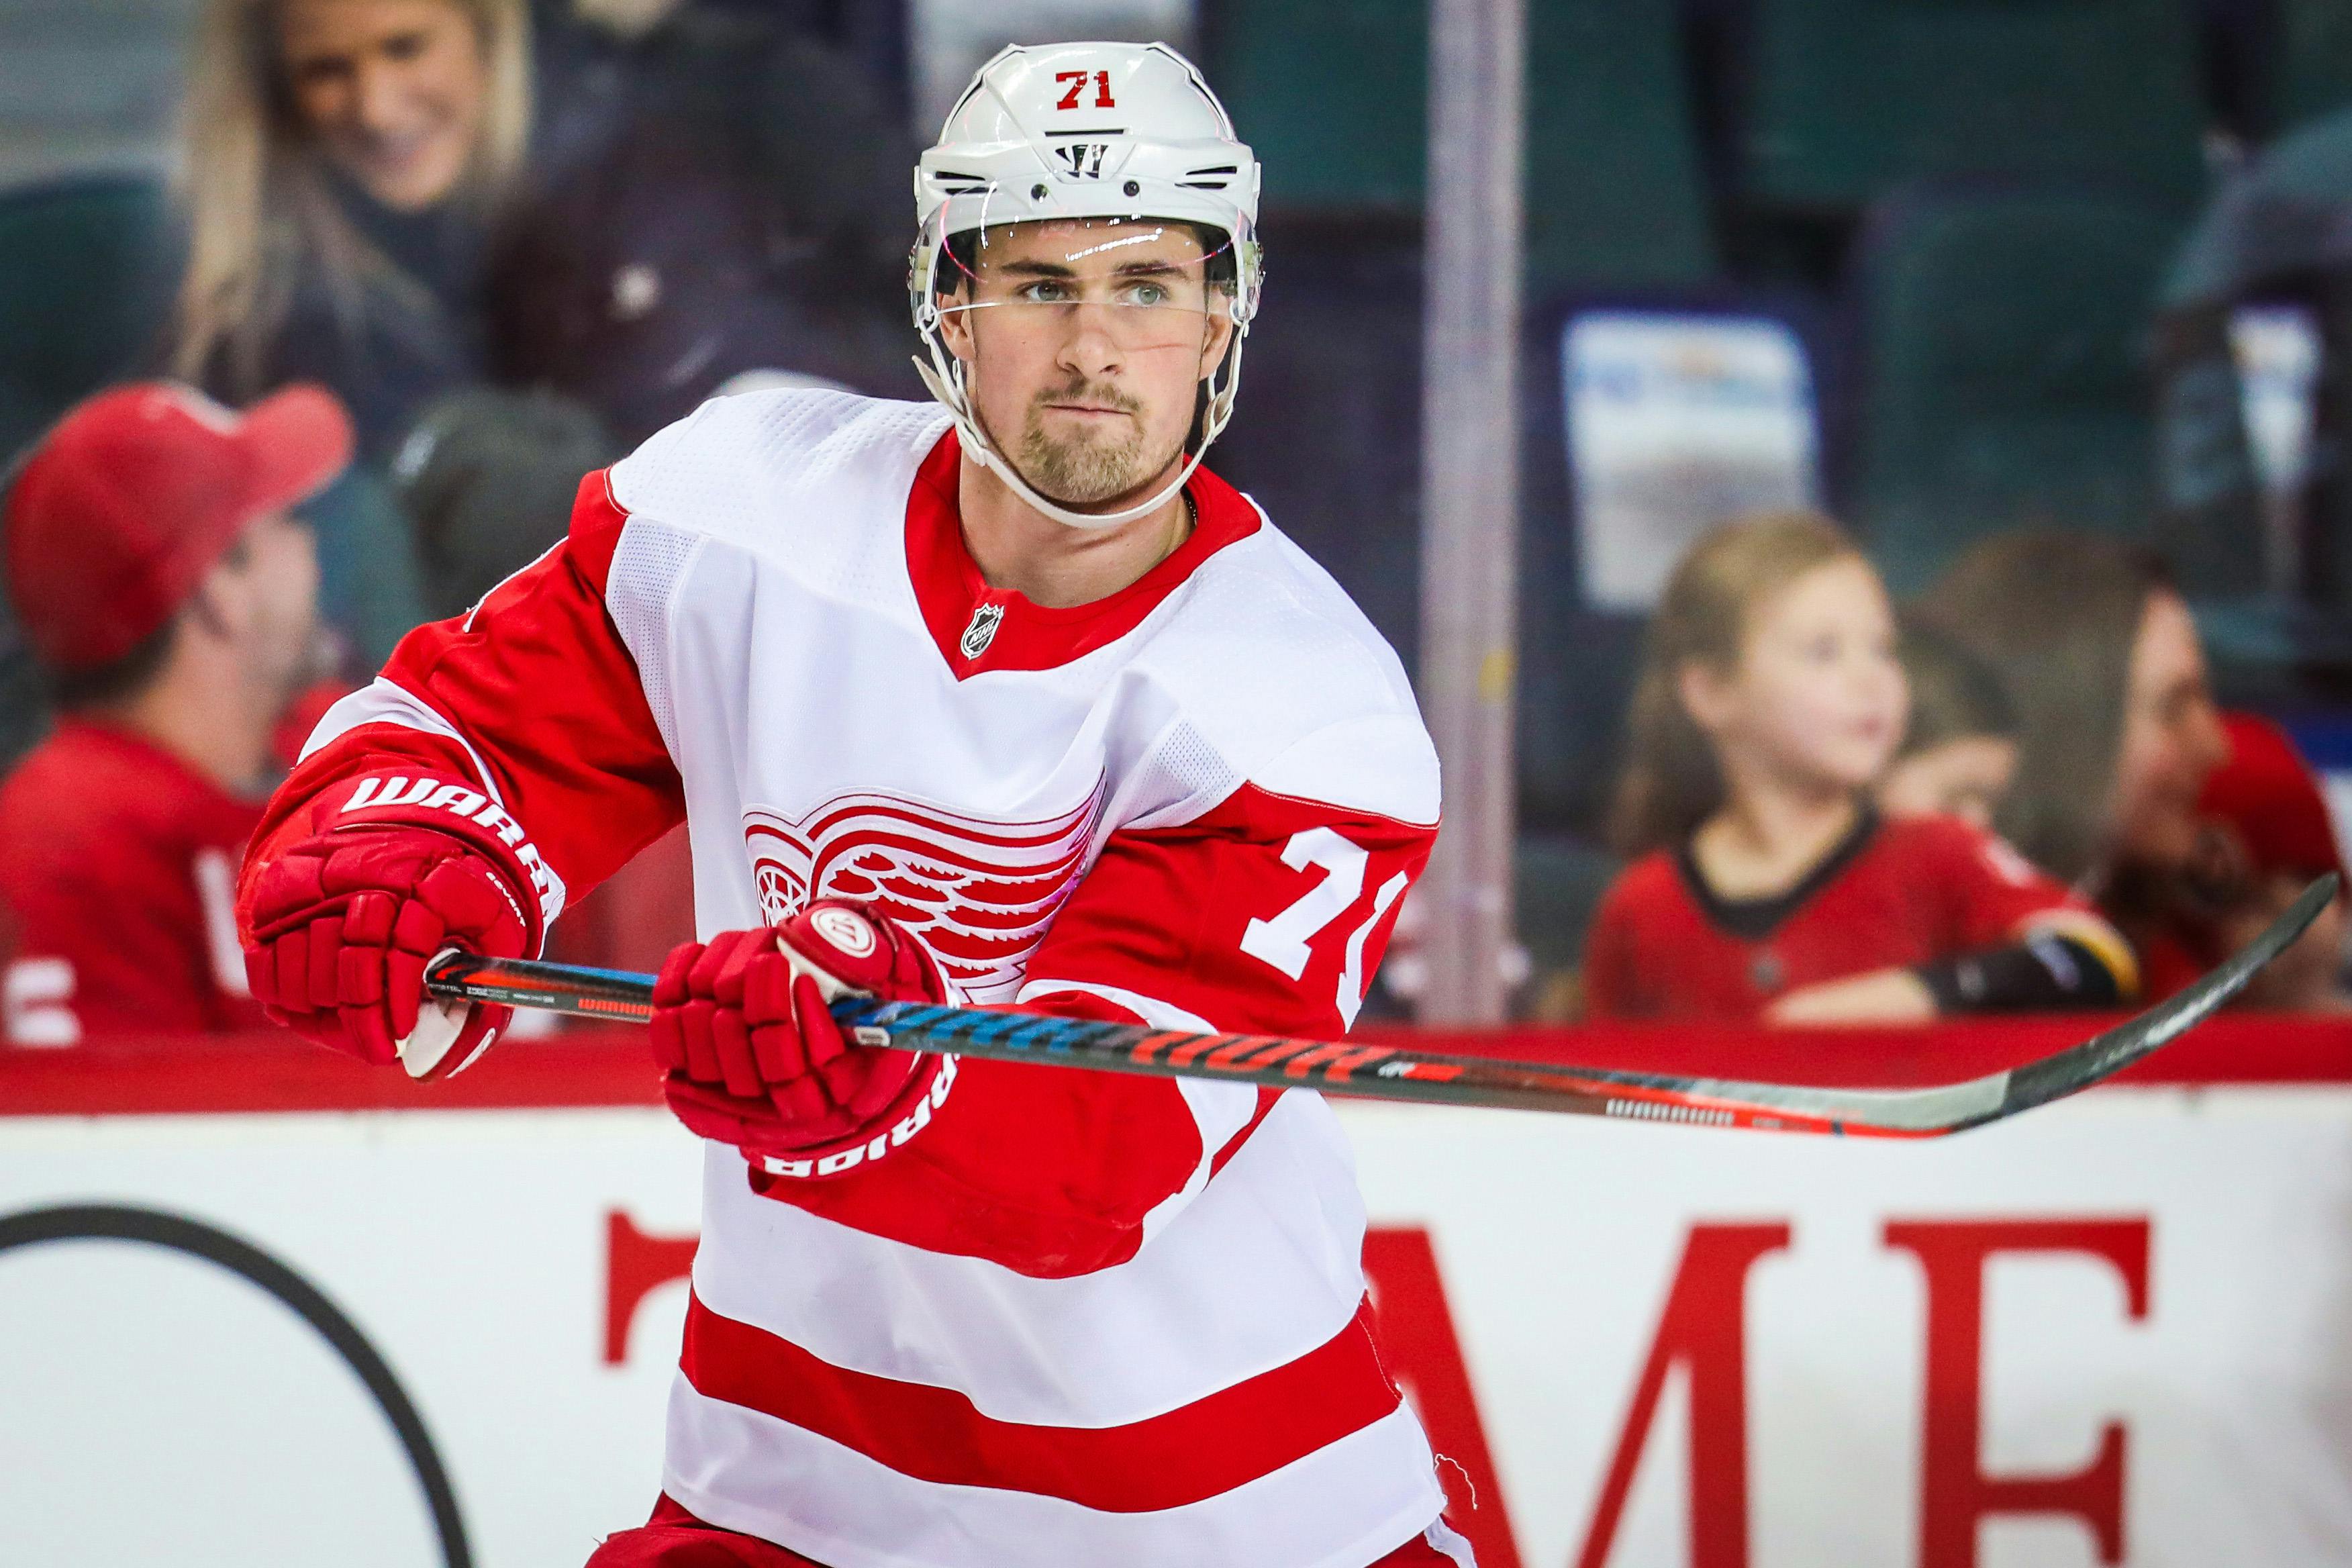 Detroit Red Wings: The NHL Network has Dylan Larkin ranked No. 19